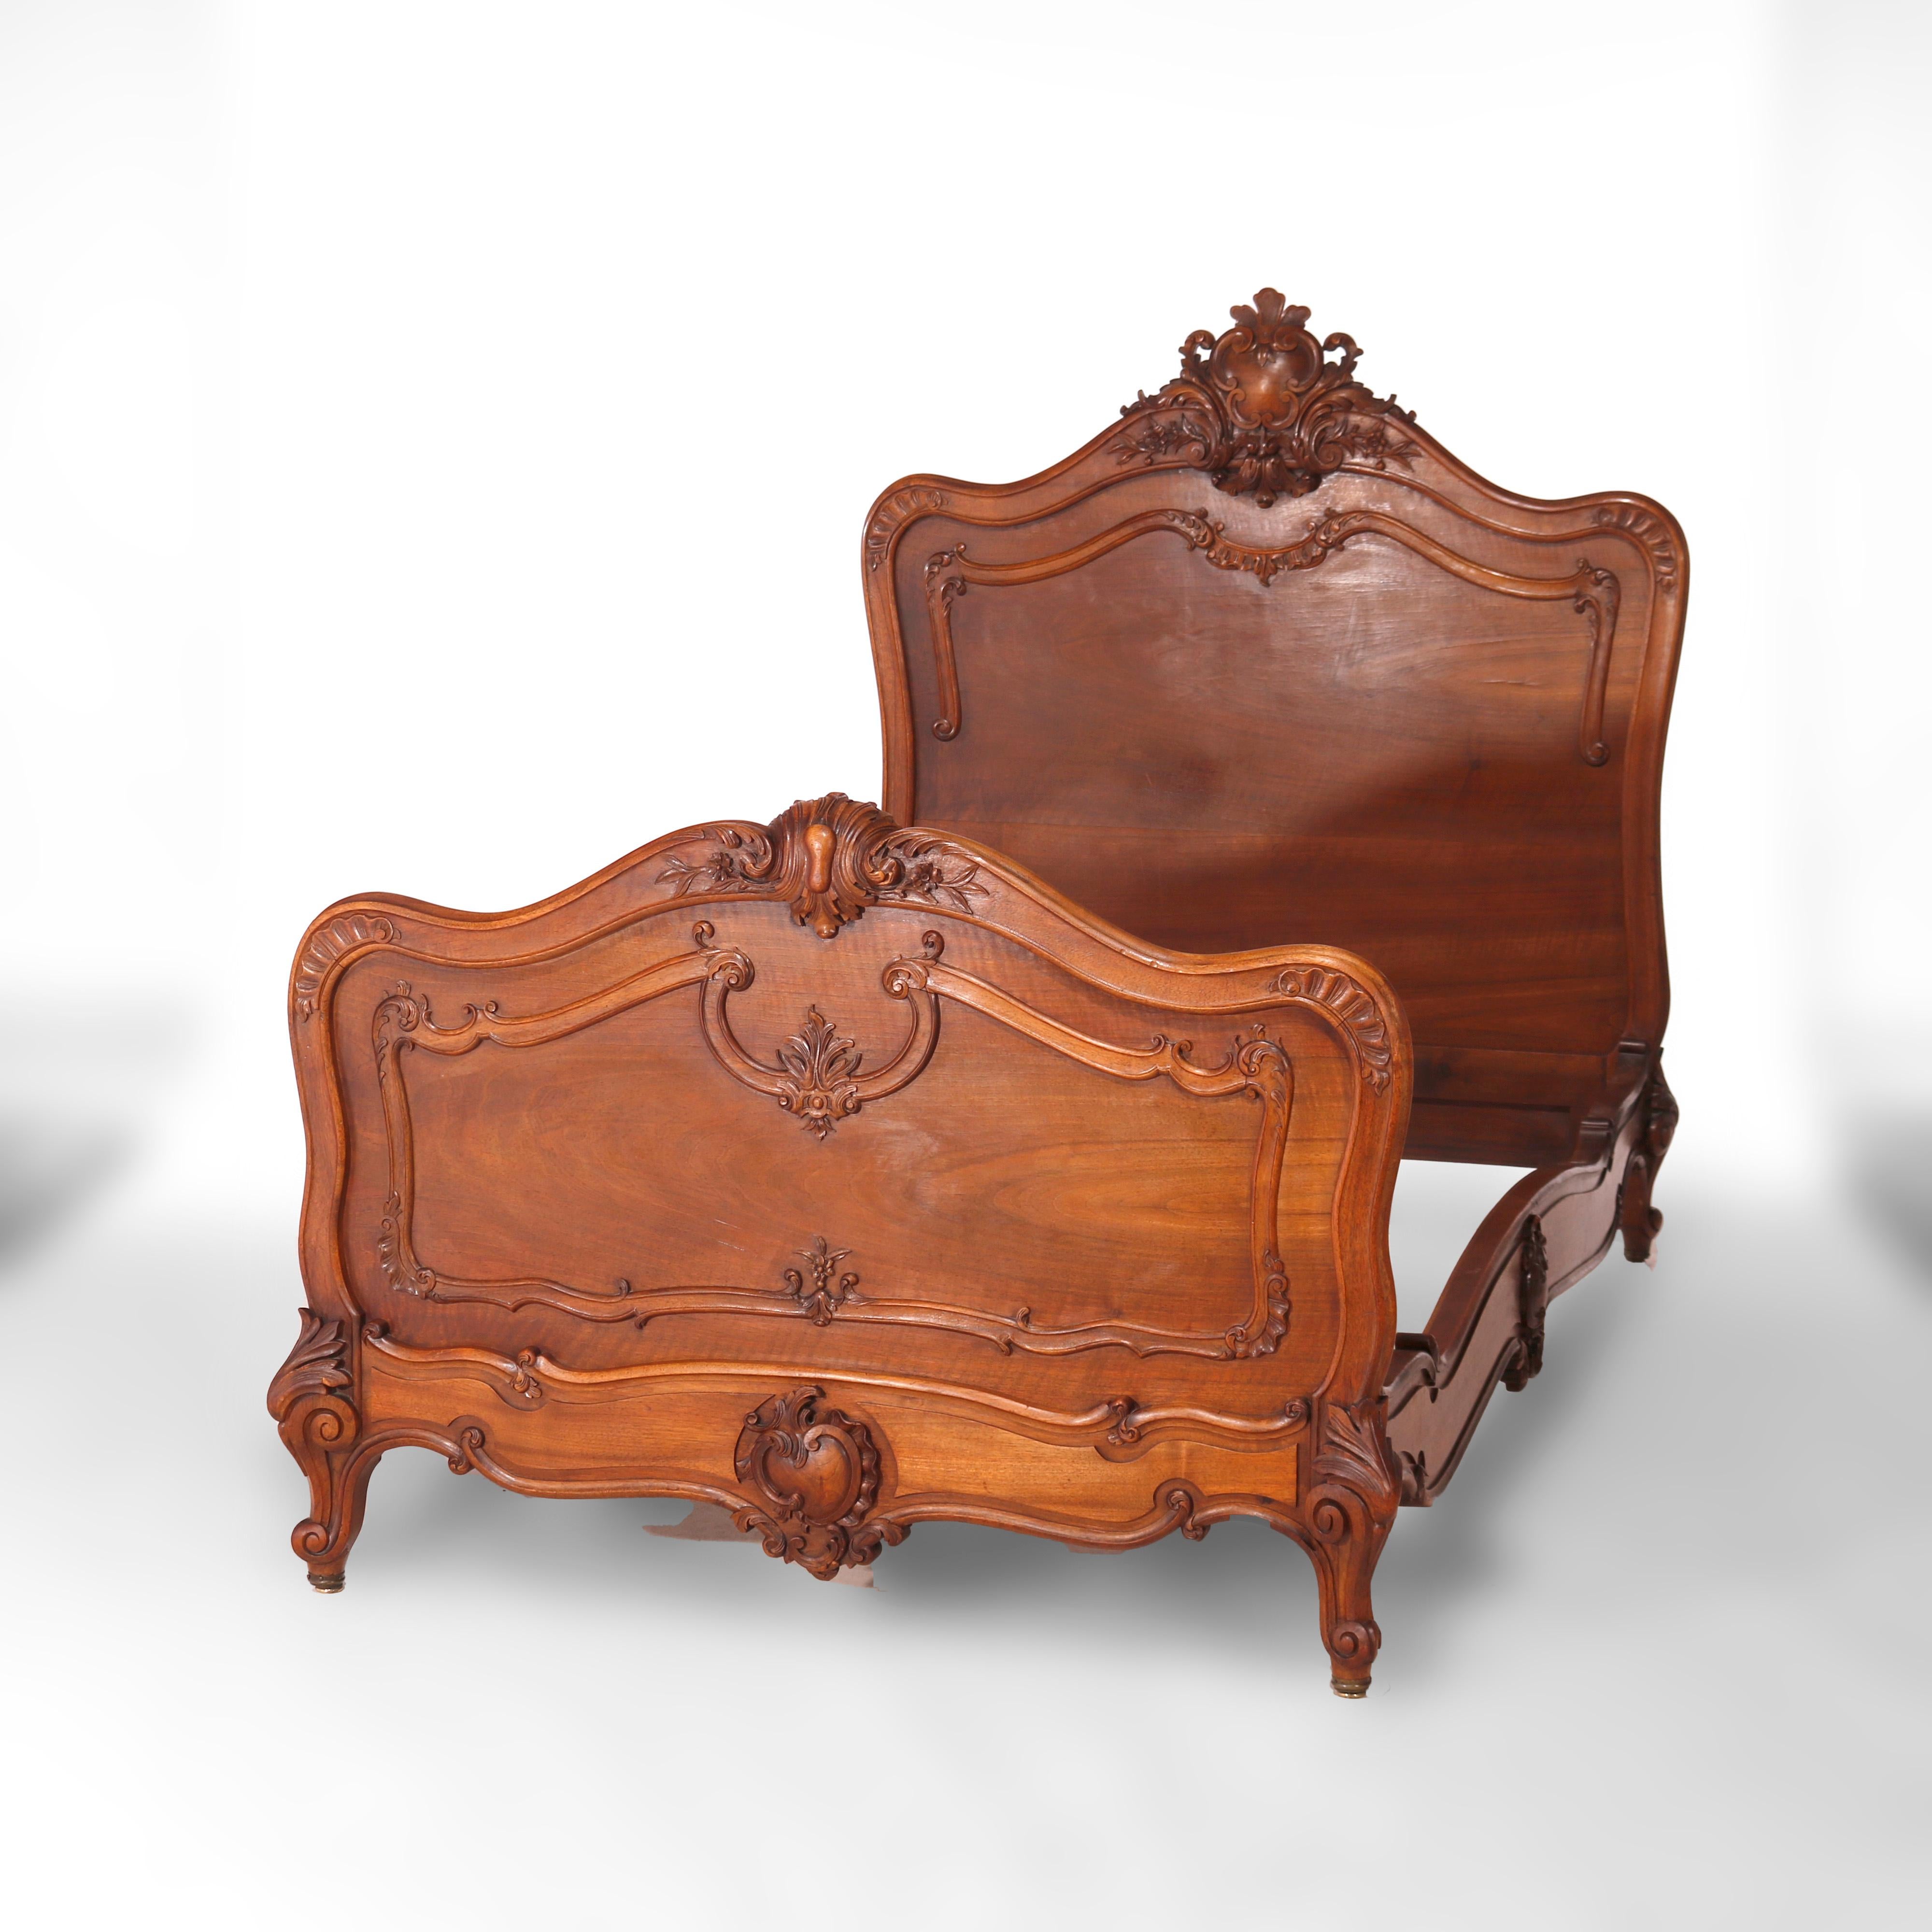 An antique pair of French Rococo twin beds offers mahogany construction with shaped headboard having carved foliate crest, matching footboard, raised on cabriole legs terminating in scroll form feet, 19th century

Measures - headboard 54